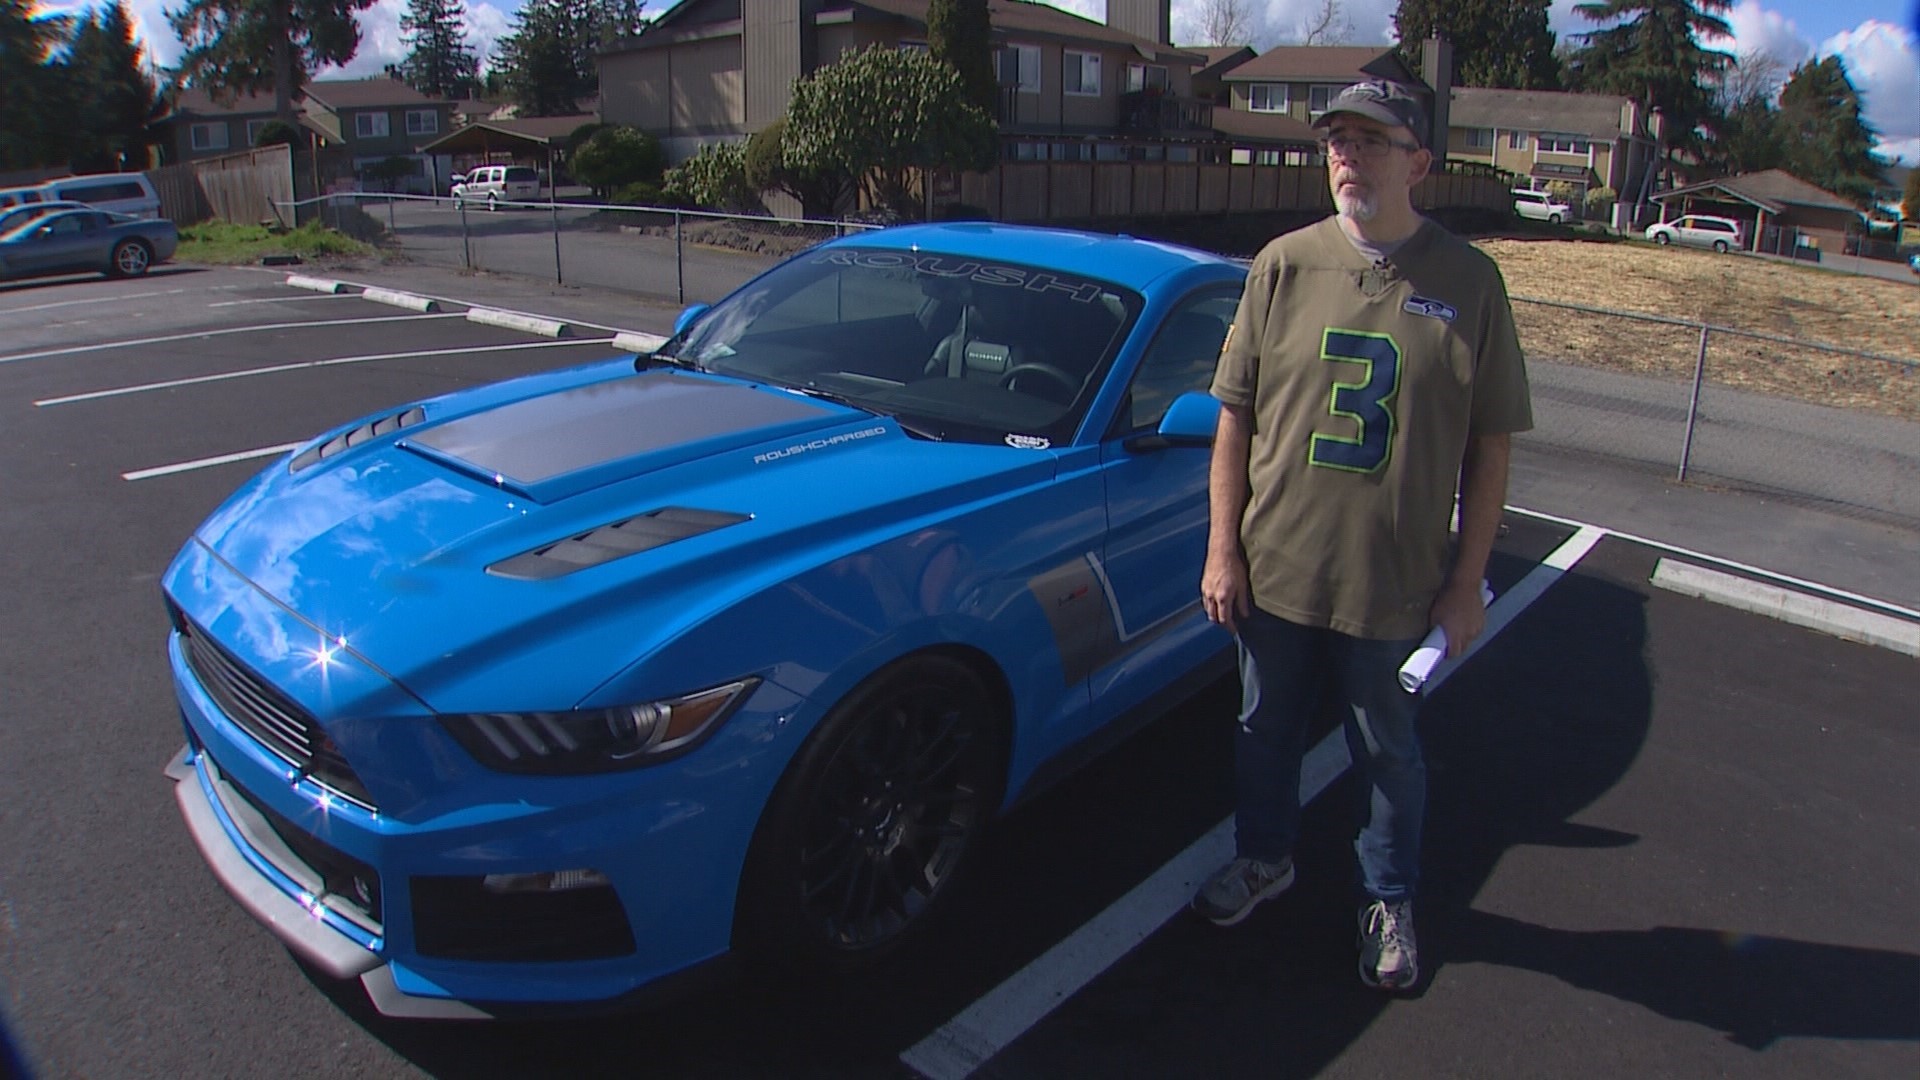 KING 5 has uncovered yet another problem involving those state car tab renewal bills. One man says the state overvalued his vehicle by more than $30,000 and has admitted the mistake. KING 5's Chris Daniels has been covering this issue and has more.